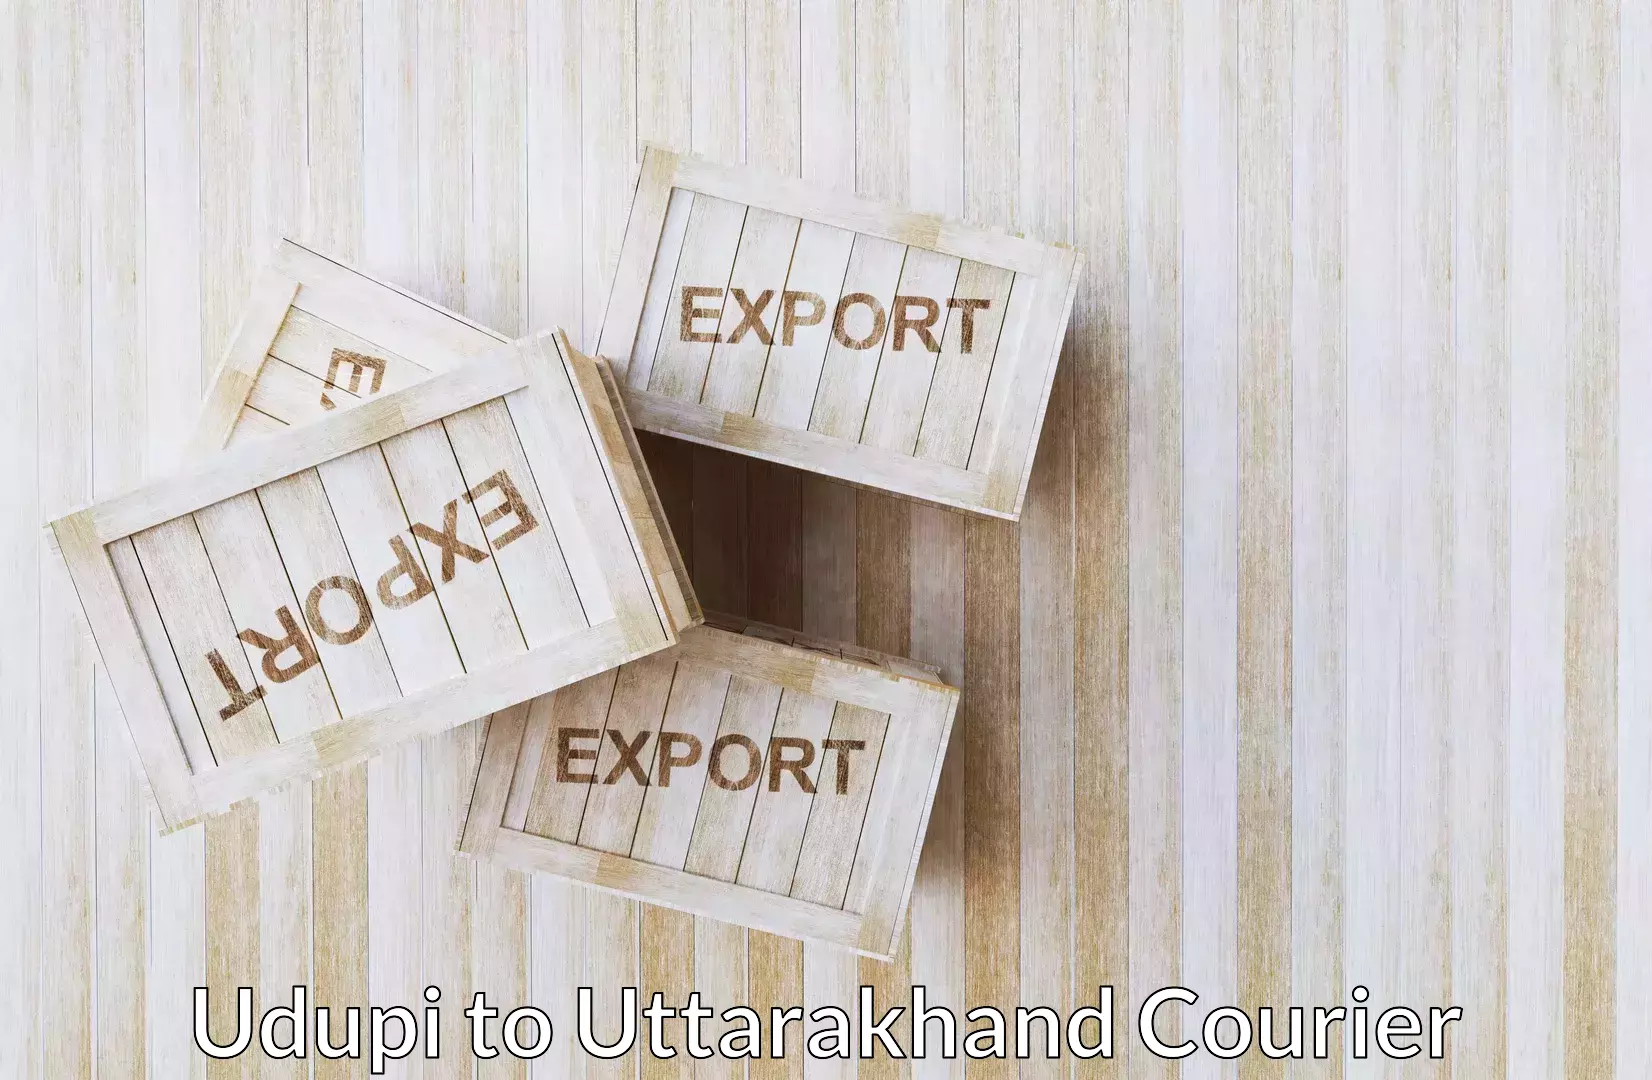 Online luggage shipping in Udupi to Haridwar